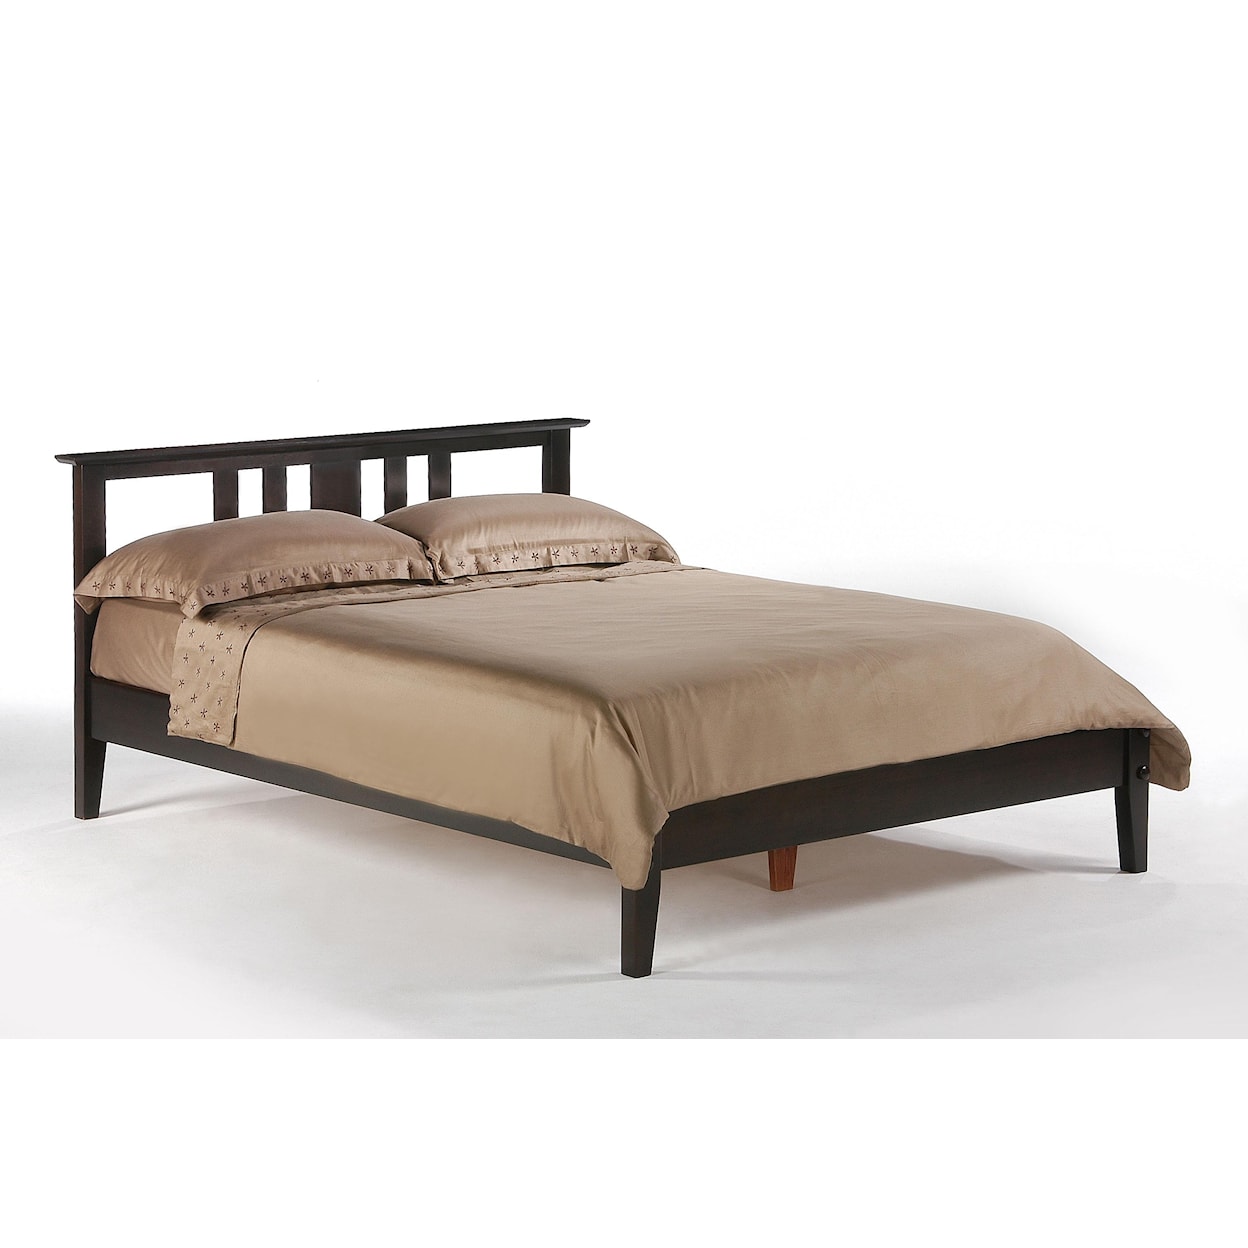 Pacific Manufacturing Thyme Full Bed